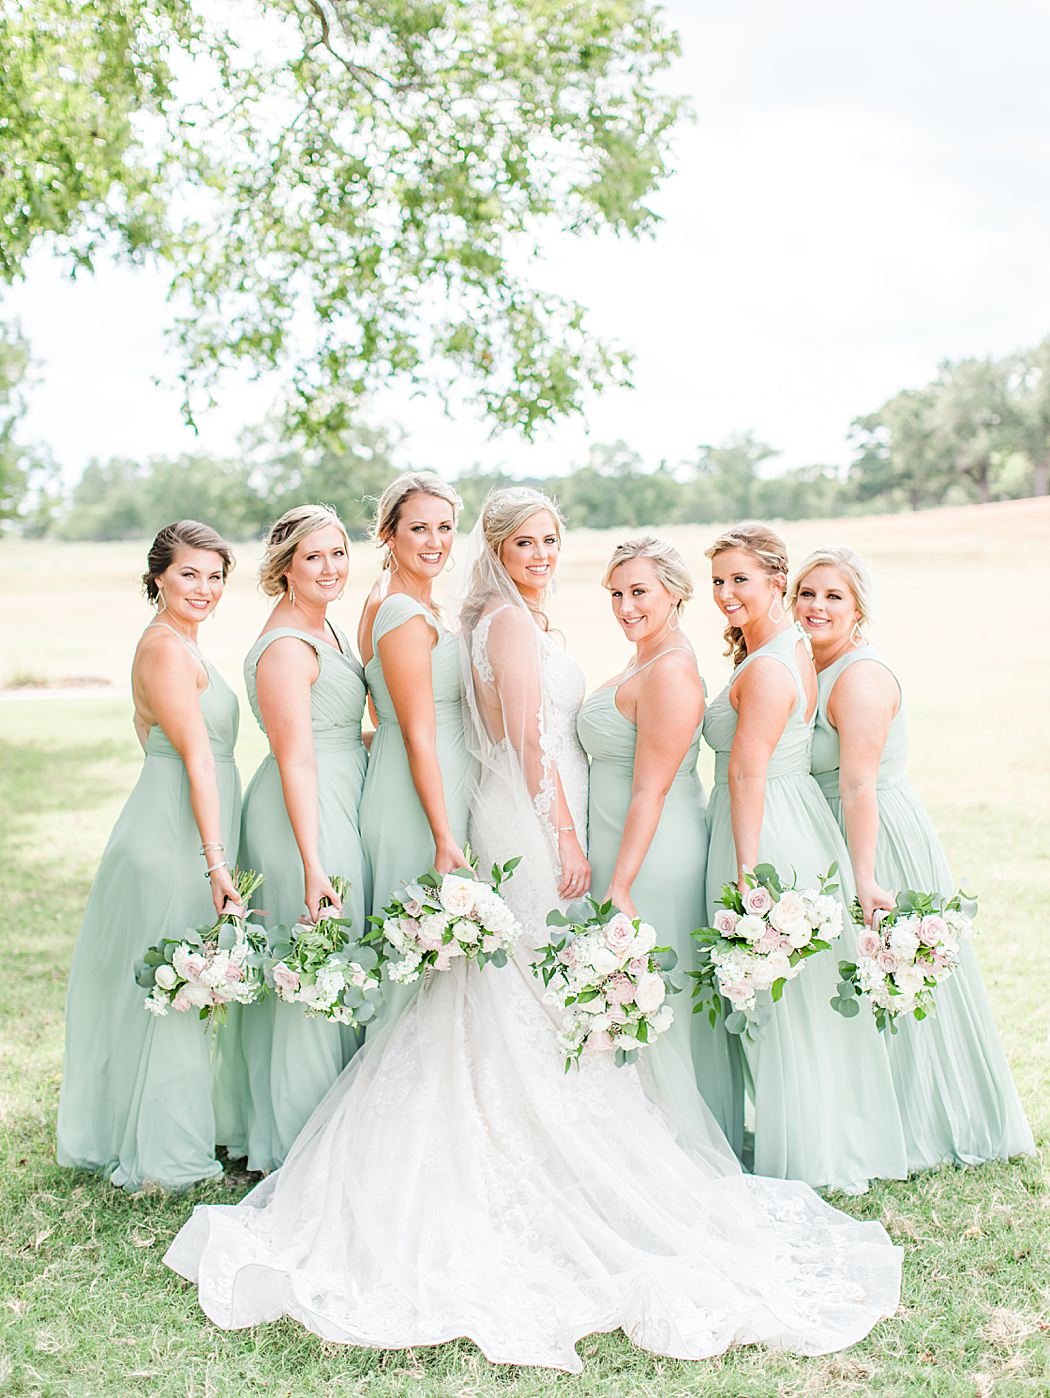 Summer Wedding at The Lodge at Country Inn Cottages in Fredericksburg Texas by Allison Jeffers Photography 0033